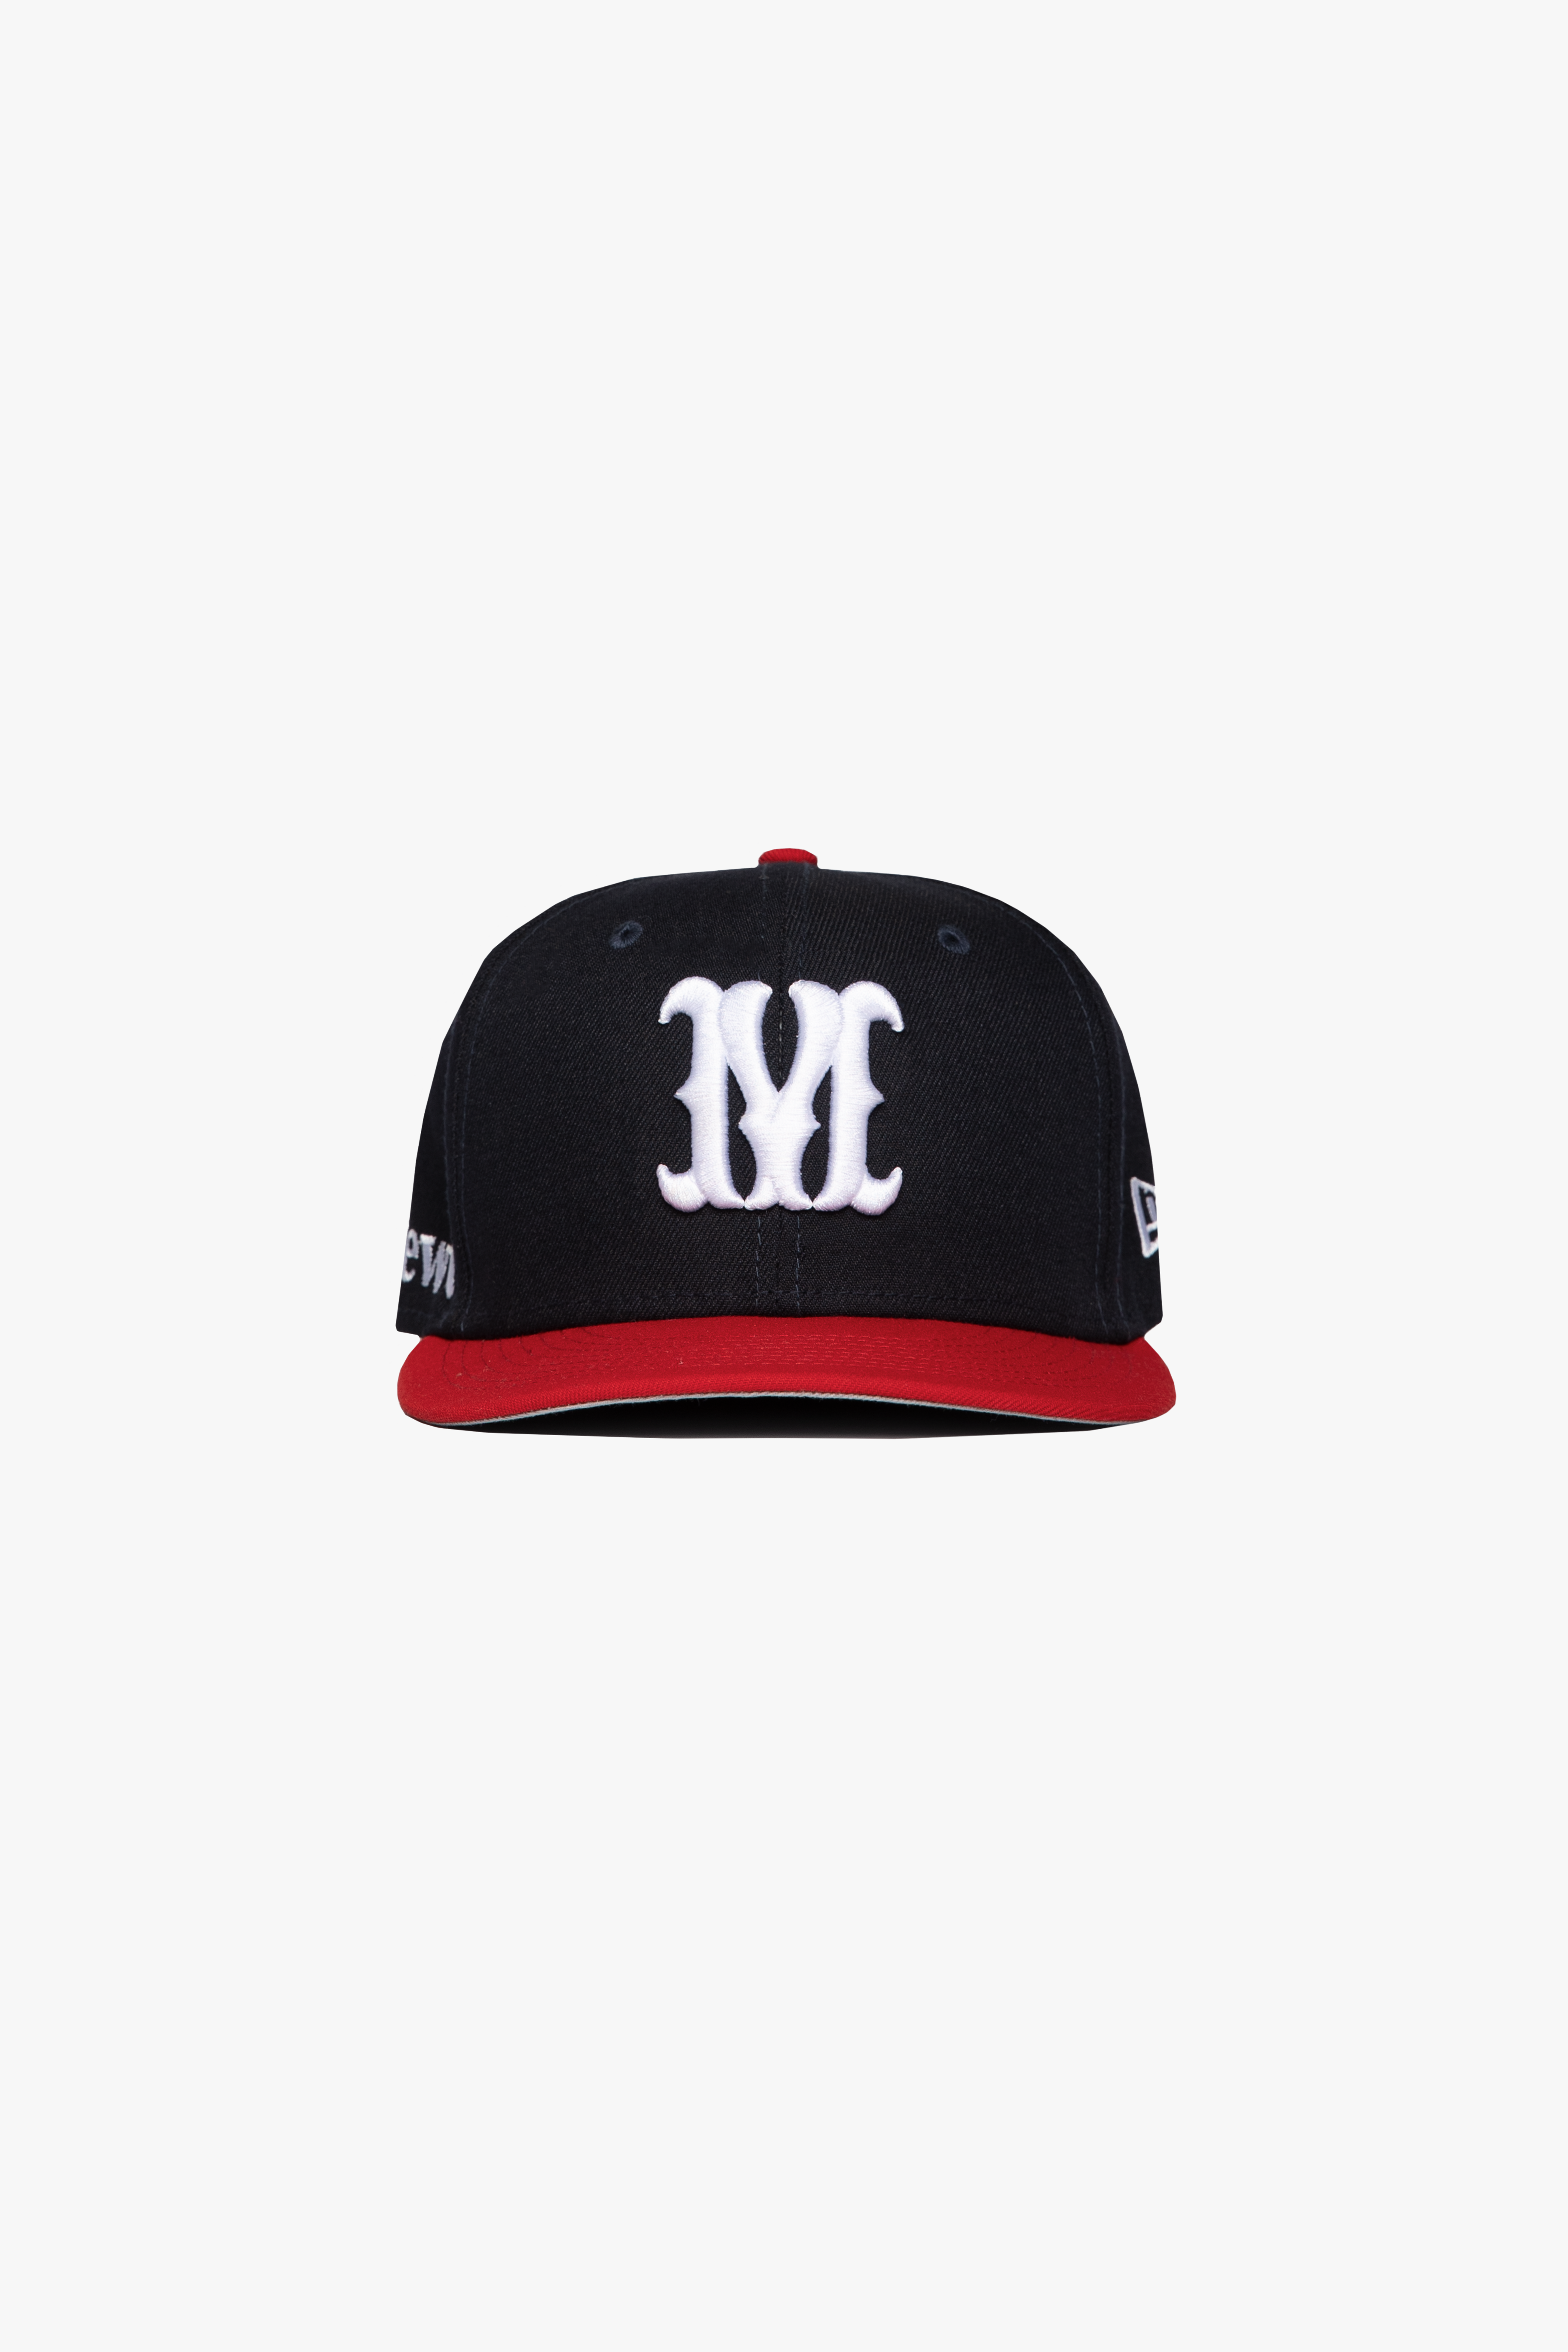 NAVY MEWT NEW ERA 59FIFTY FITTED